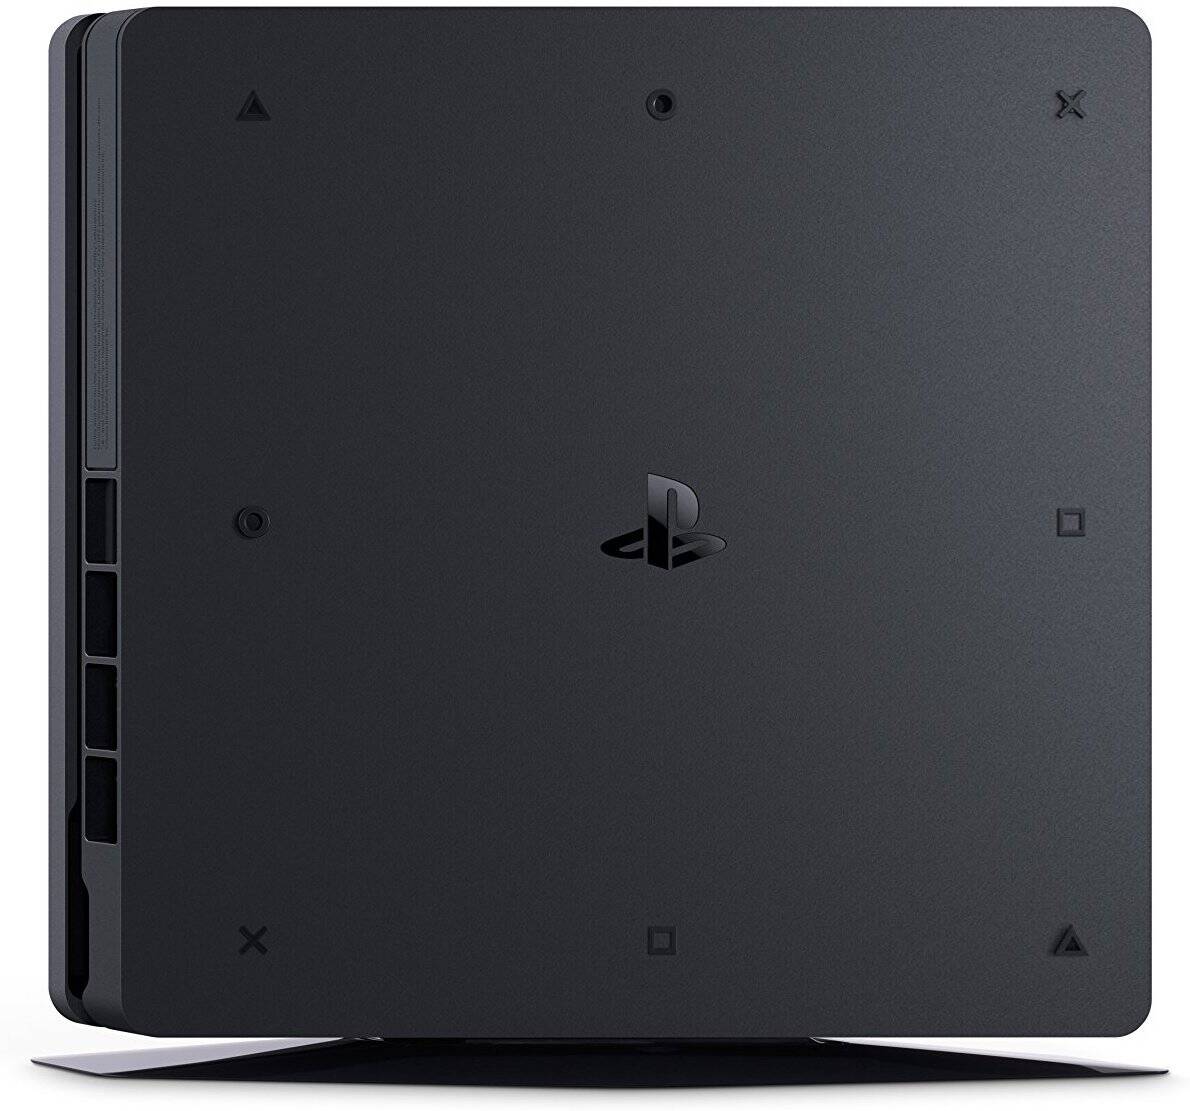 playstation 4 for cheap